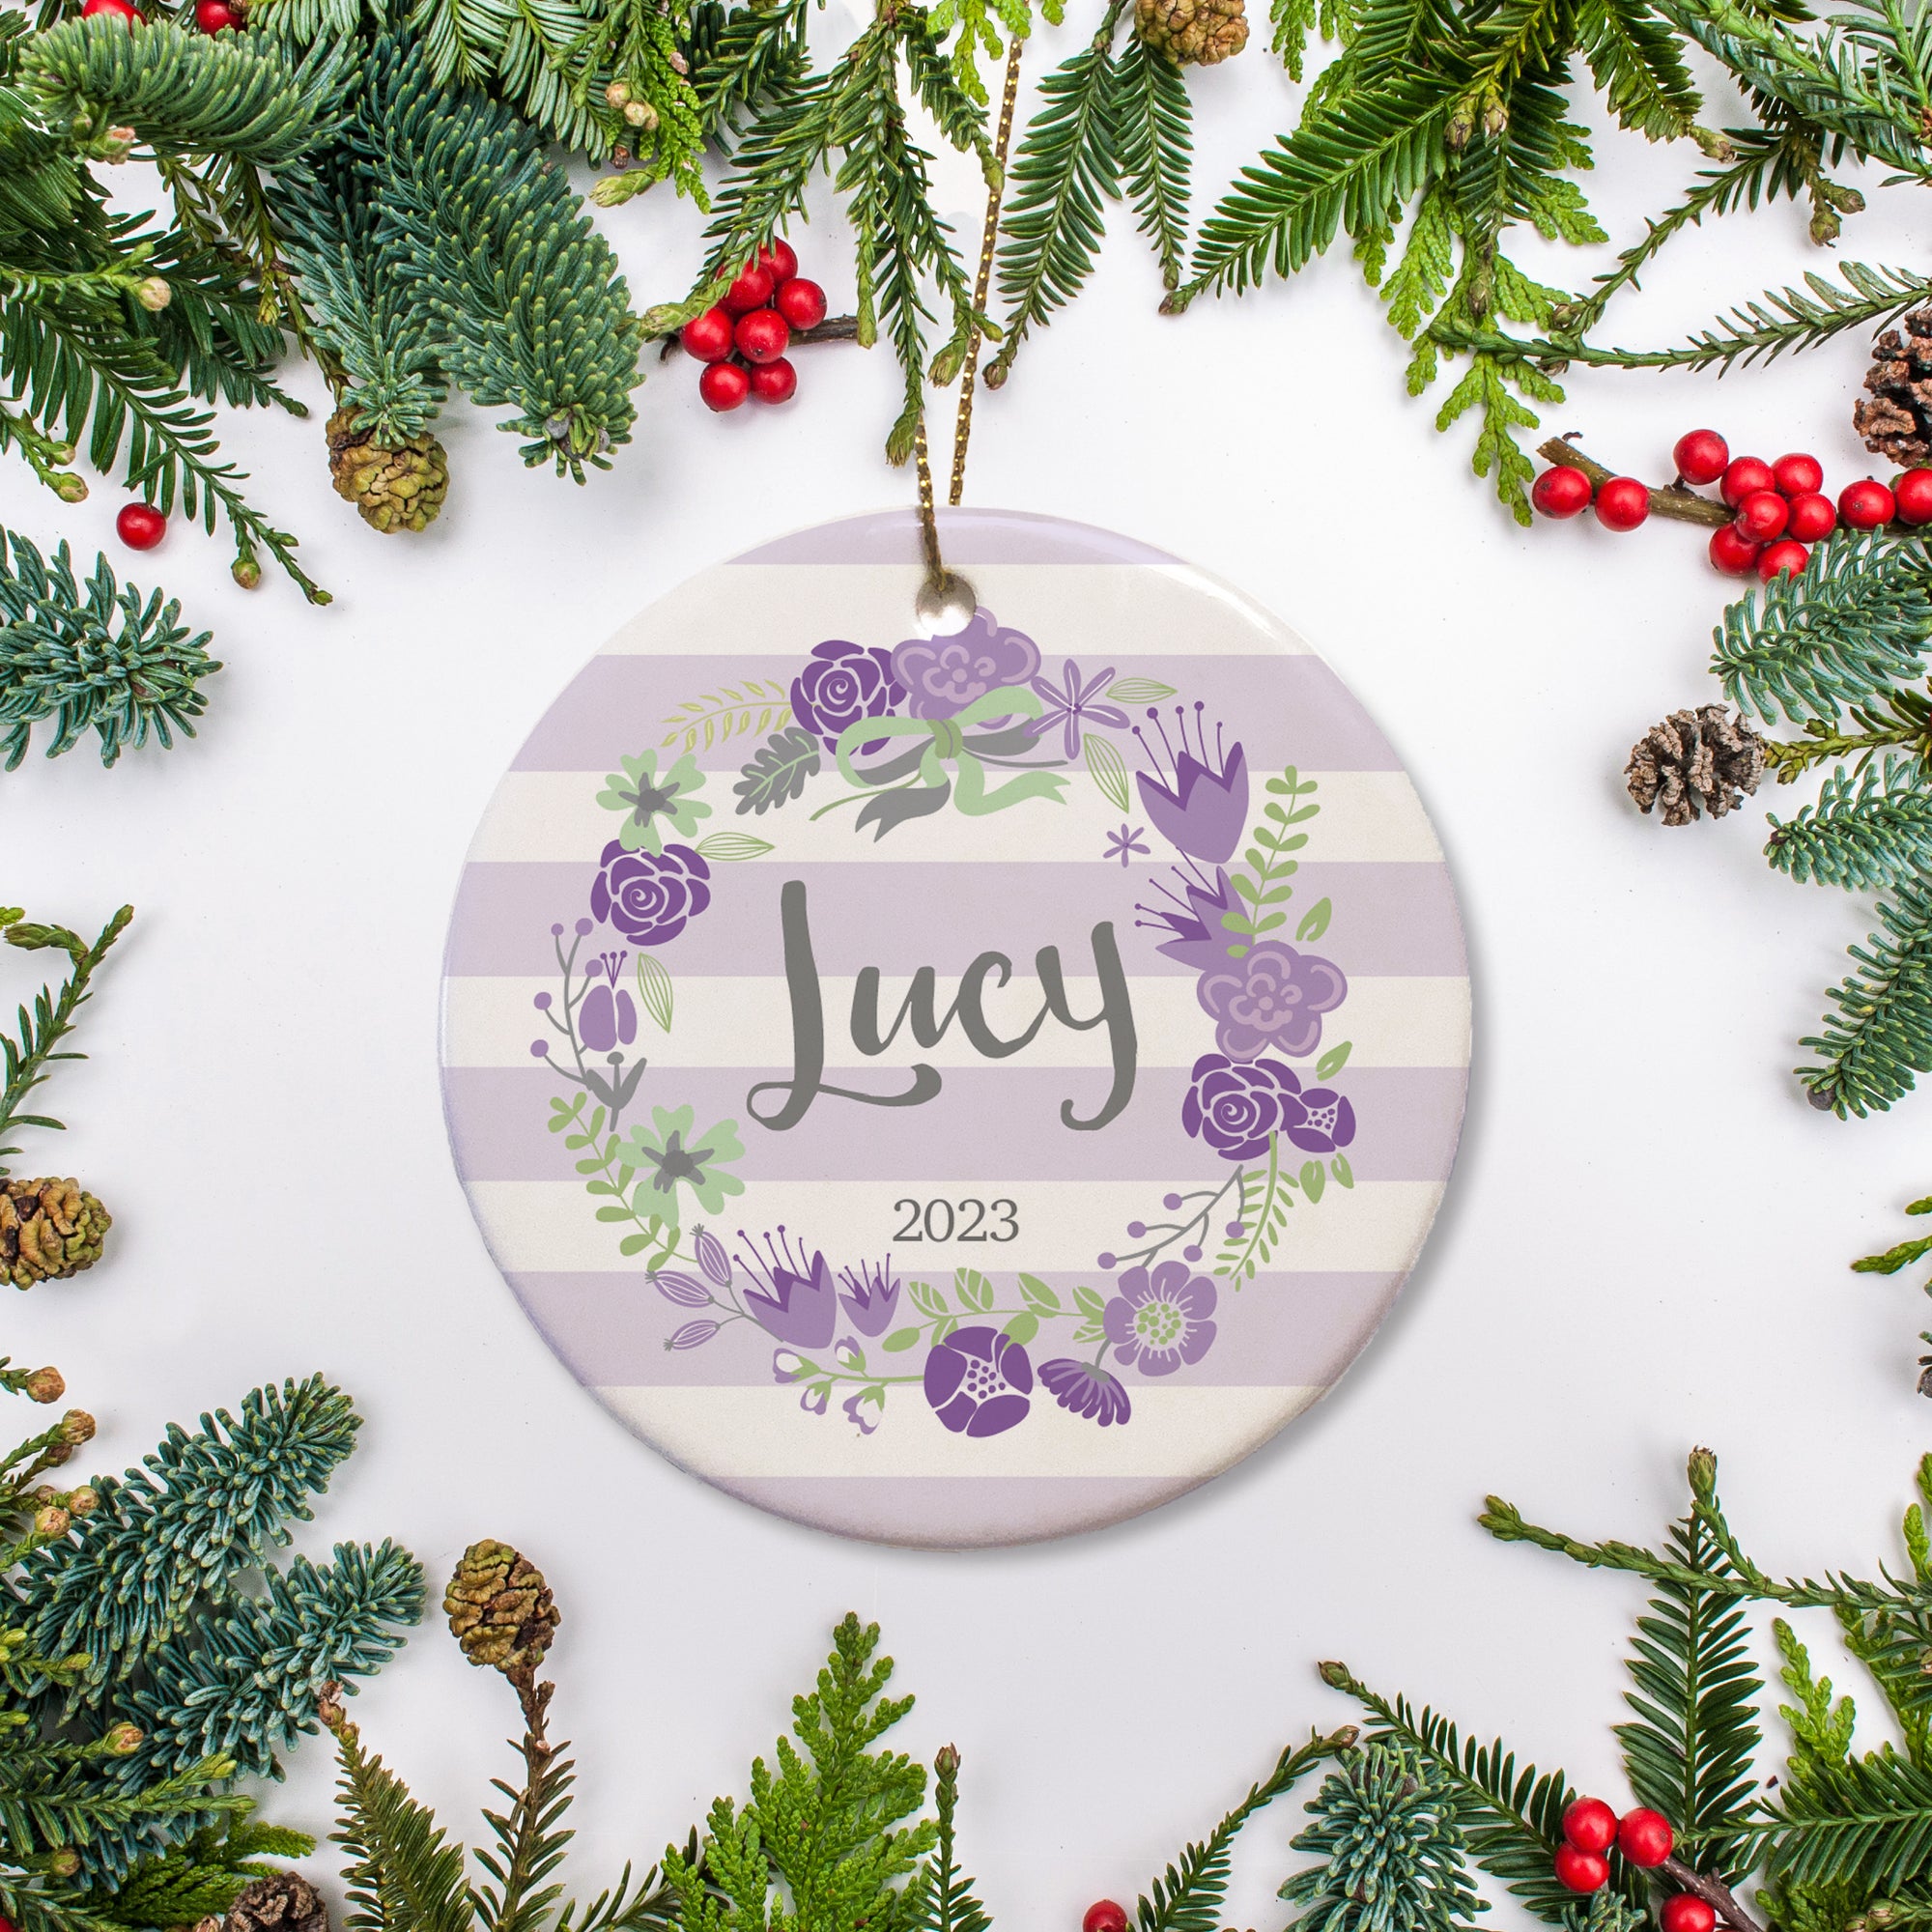 Personalized Christmas Ornament with name and year - purple and white stripes and a floral wreath surrounding the name | PIPSY.COM